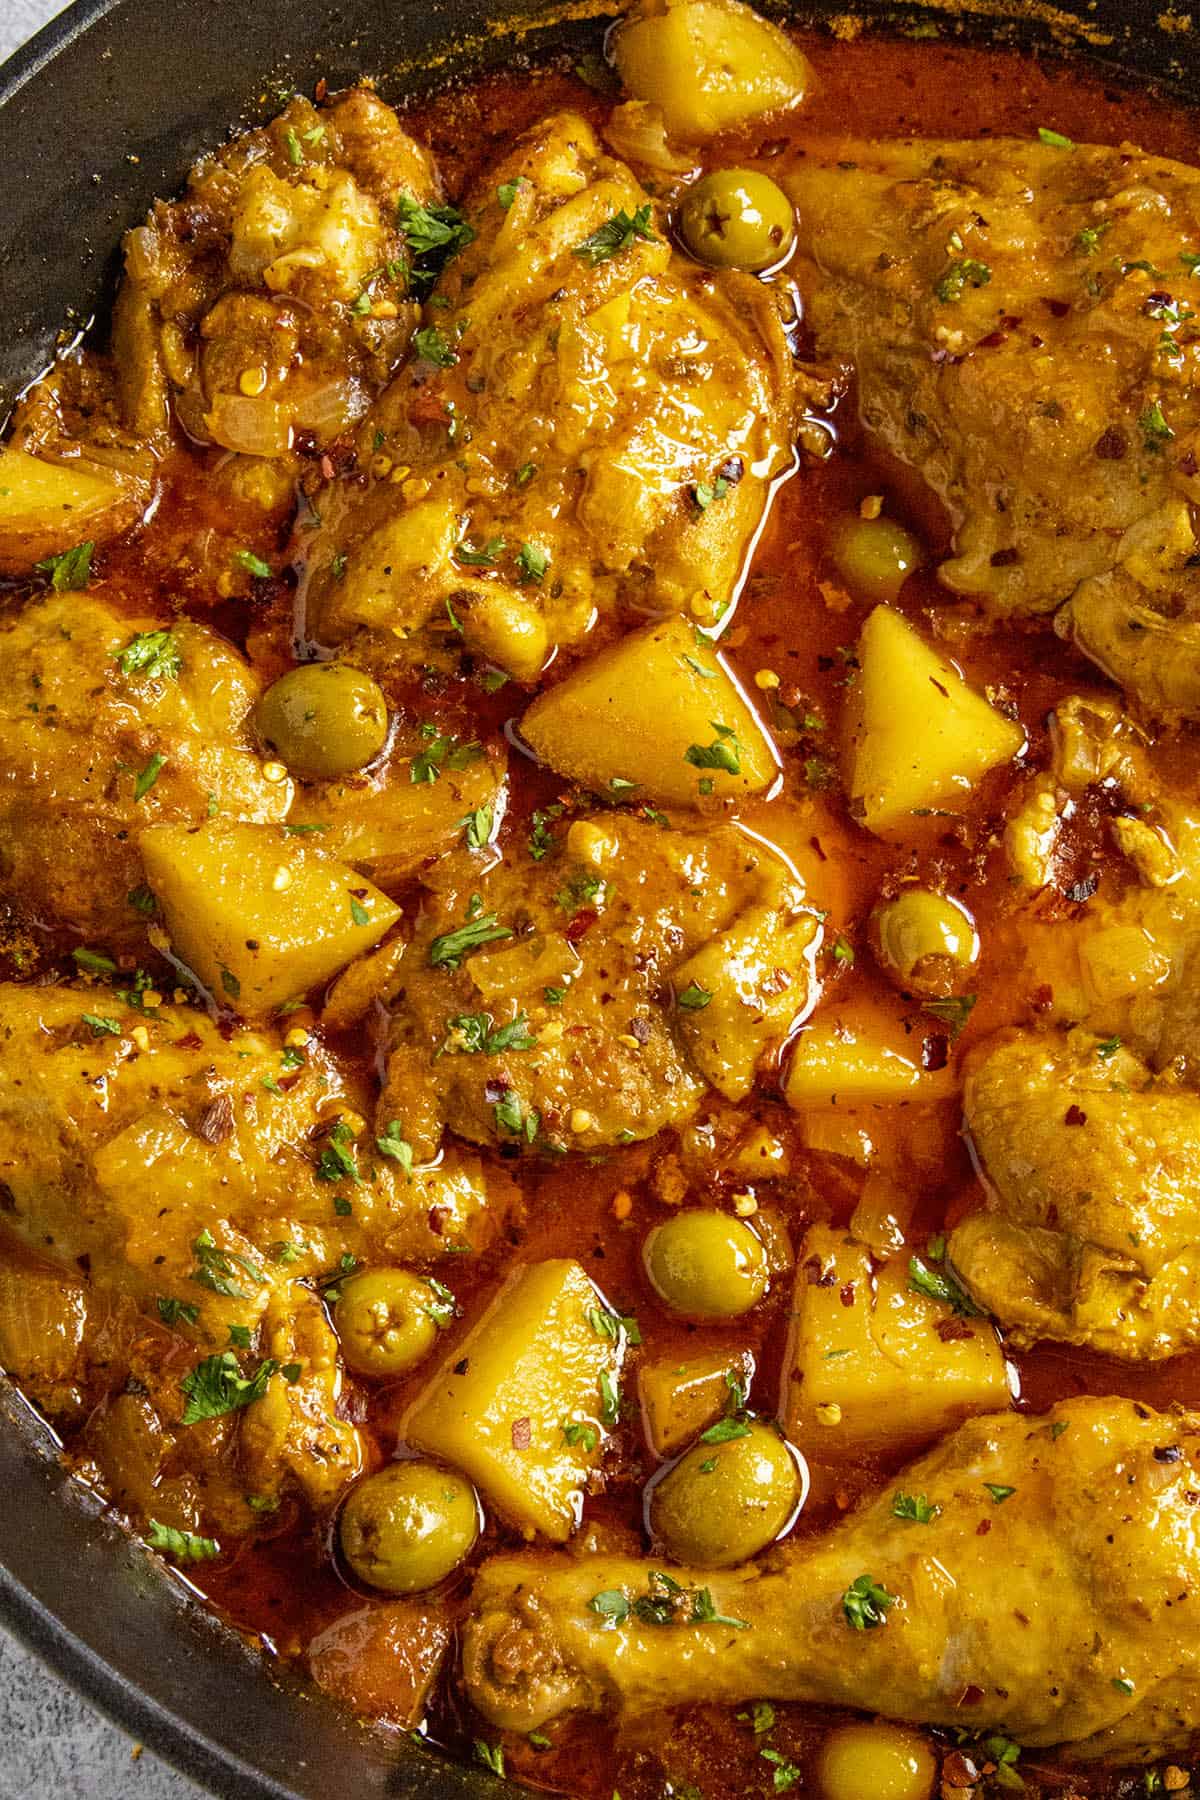 Pollo Guisado Recipe (Chicken Stew) in a pot with lots of potatoes and olives